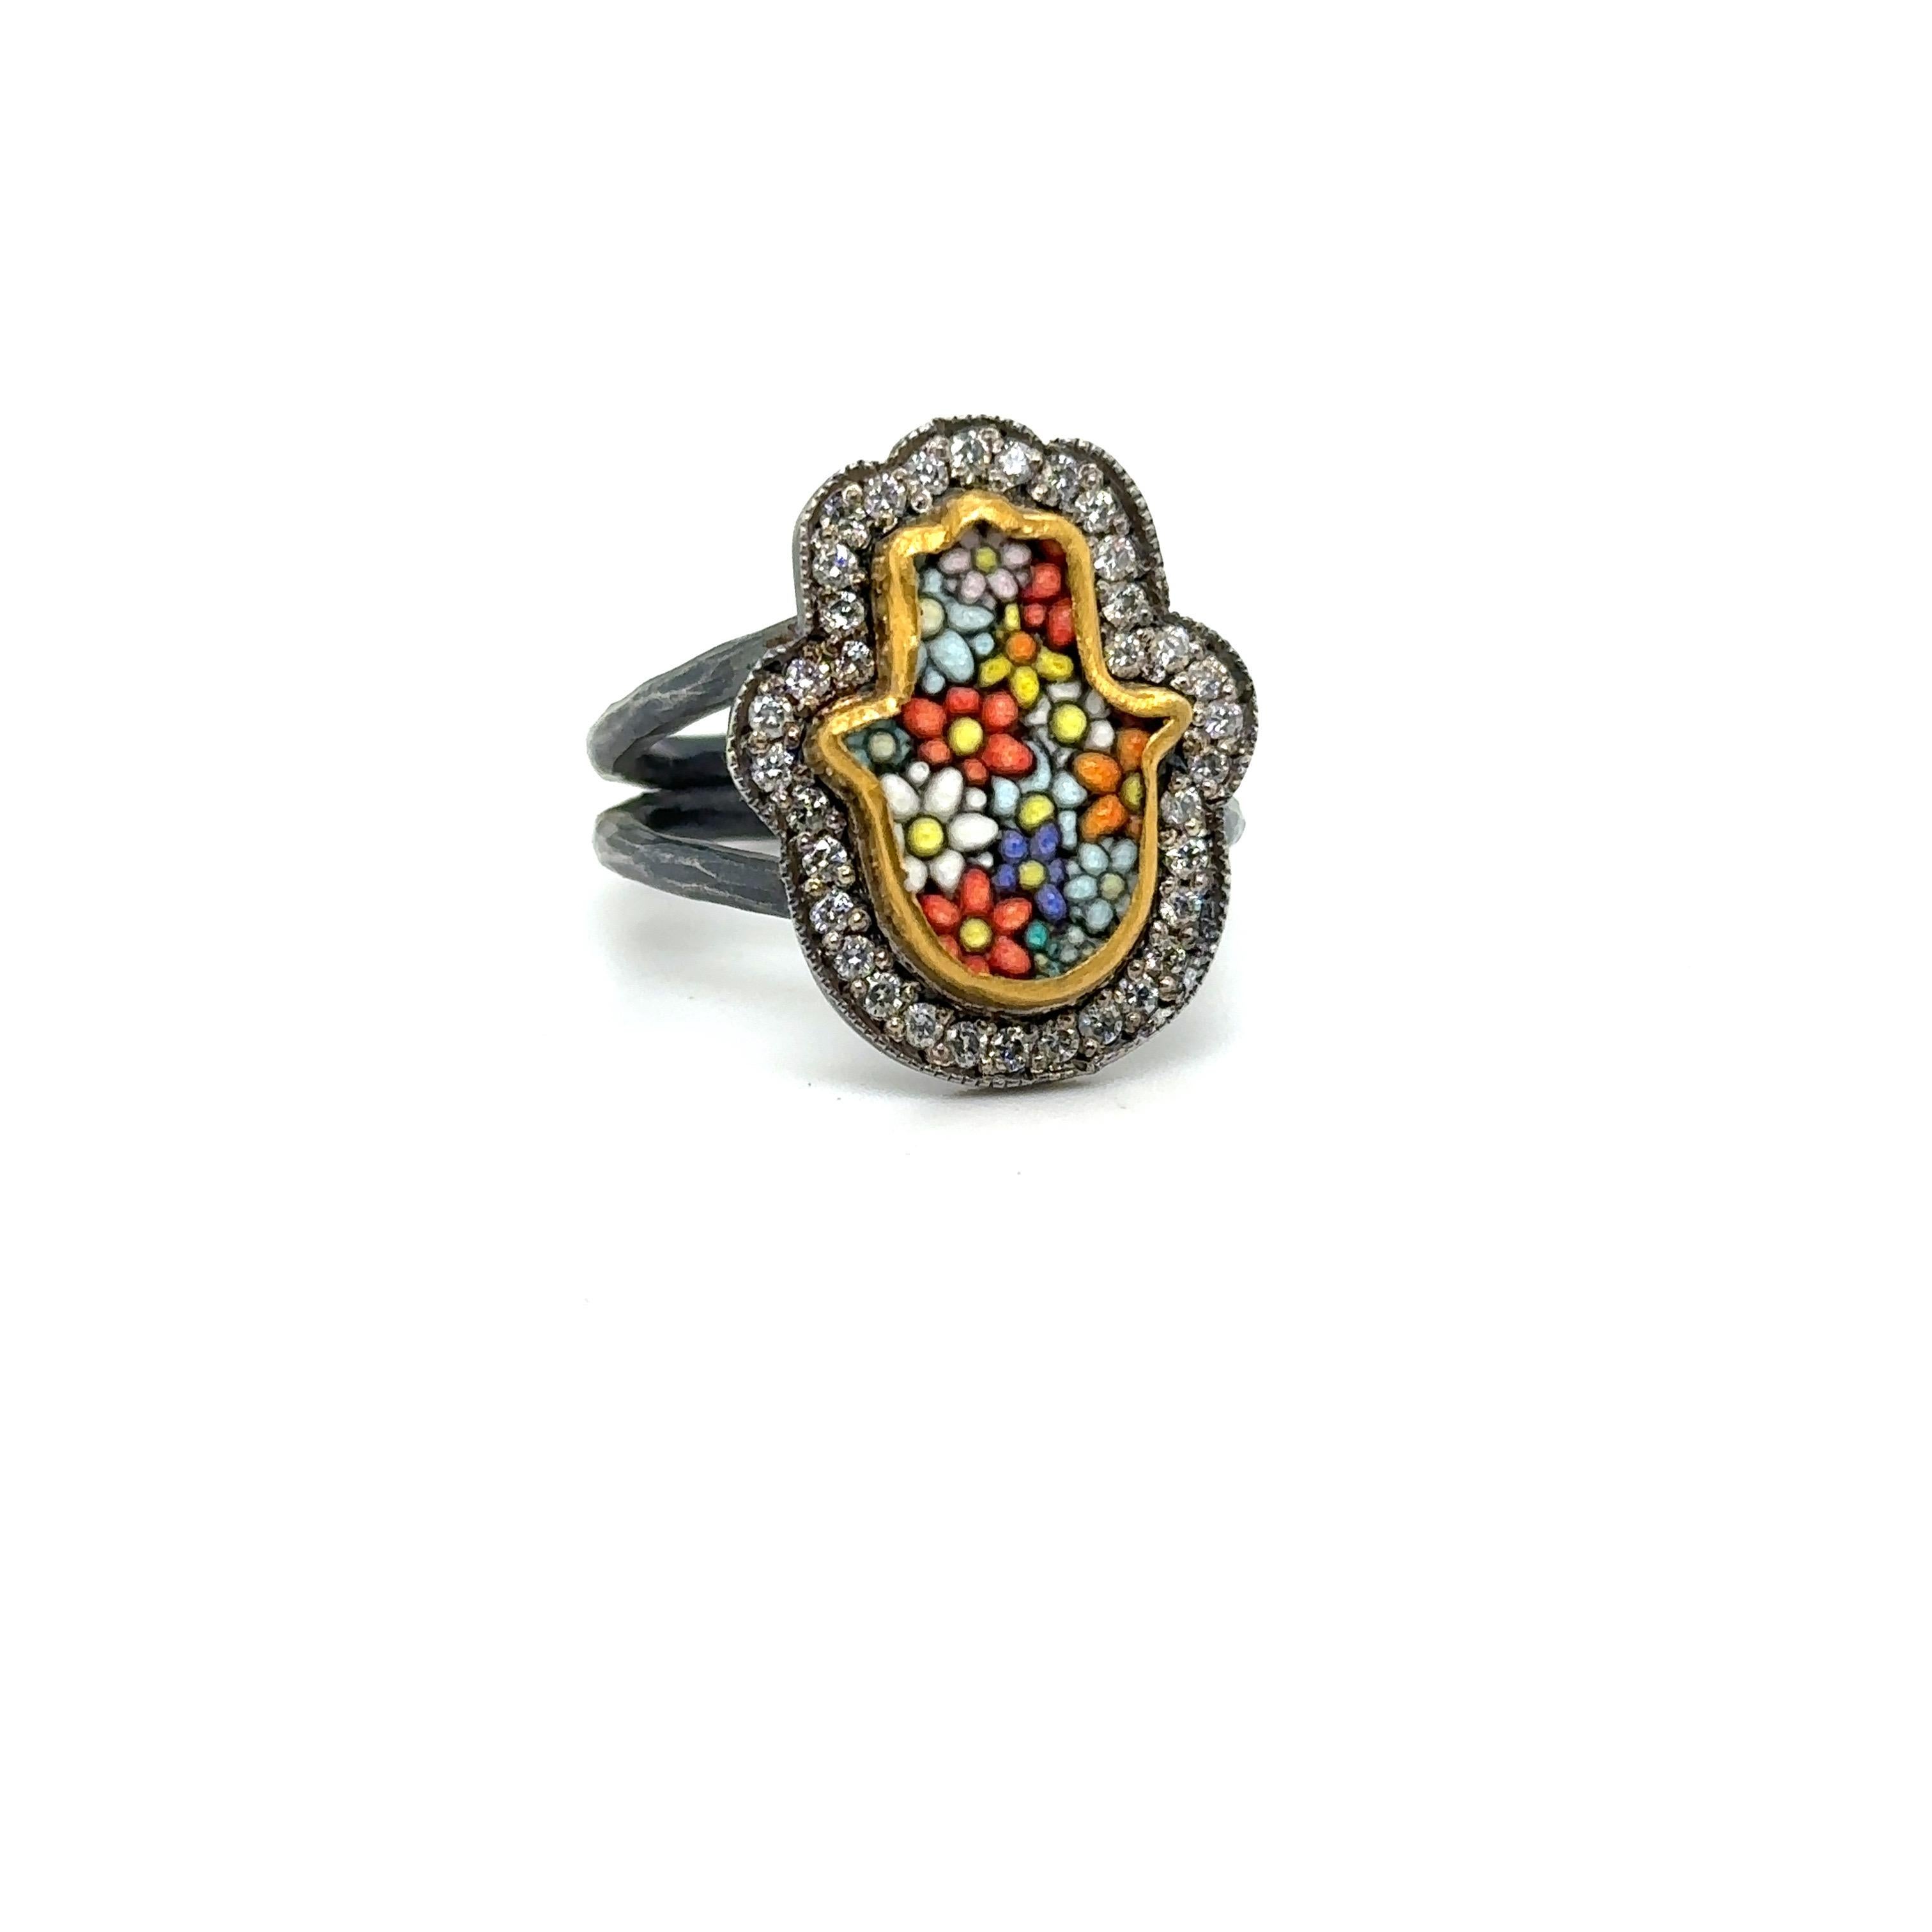 24KT GOLD/SS MICRO MOSAIC RING WITH 0.45CT DIAMONDS
Metal: 24K GOLD/OXIDIZED SS
Diamond Info: I/J COLOR SI1/2 ROUND BRILLIANT
Total Ct Weight:  0.45 cwt.
Item Weight: 8.14 gm
Ring Size: 8 (Re-sizable)
Measurements:  17 mm x 21.20 mm
